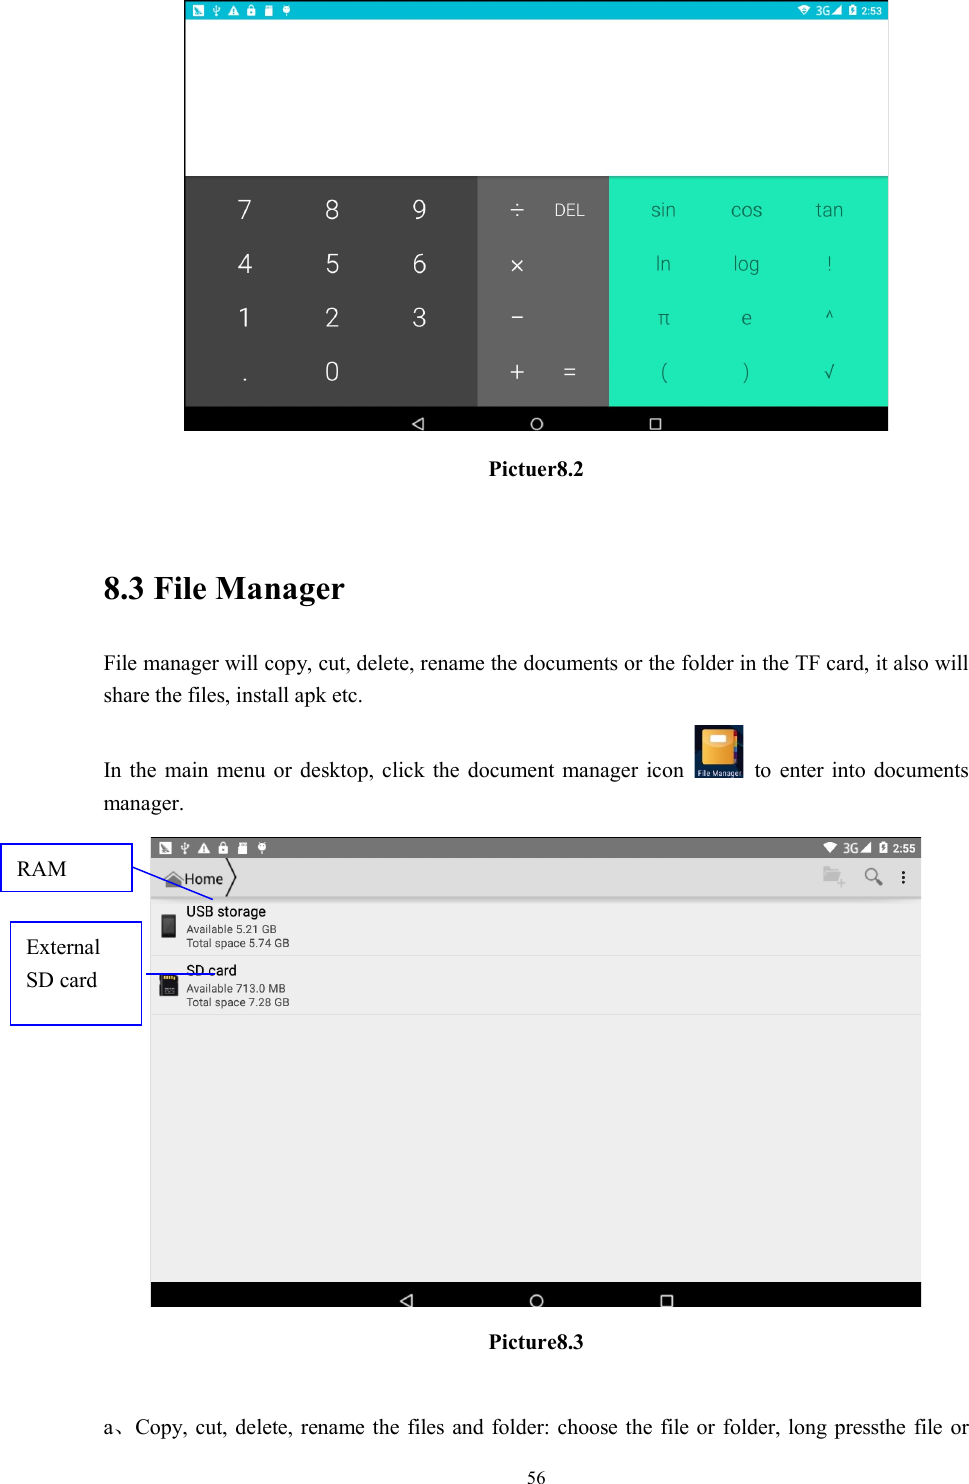      56 Pictuer8.2  8.3 File Manager File manager will copy, cut, delete, rename the documents or the folder in the TF card, it also will share the files, install apk etc. In the  main  menu  or  desktop,  click  the  document  manager  icon    to  enter  into documents manager.  Picture8.3  a、Copy, cut, delete, rename the  files and folder: choose the file or folder, long pressthe file or RAM External SD card 